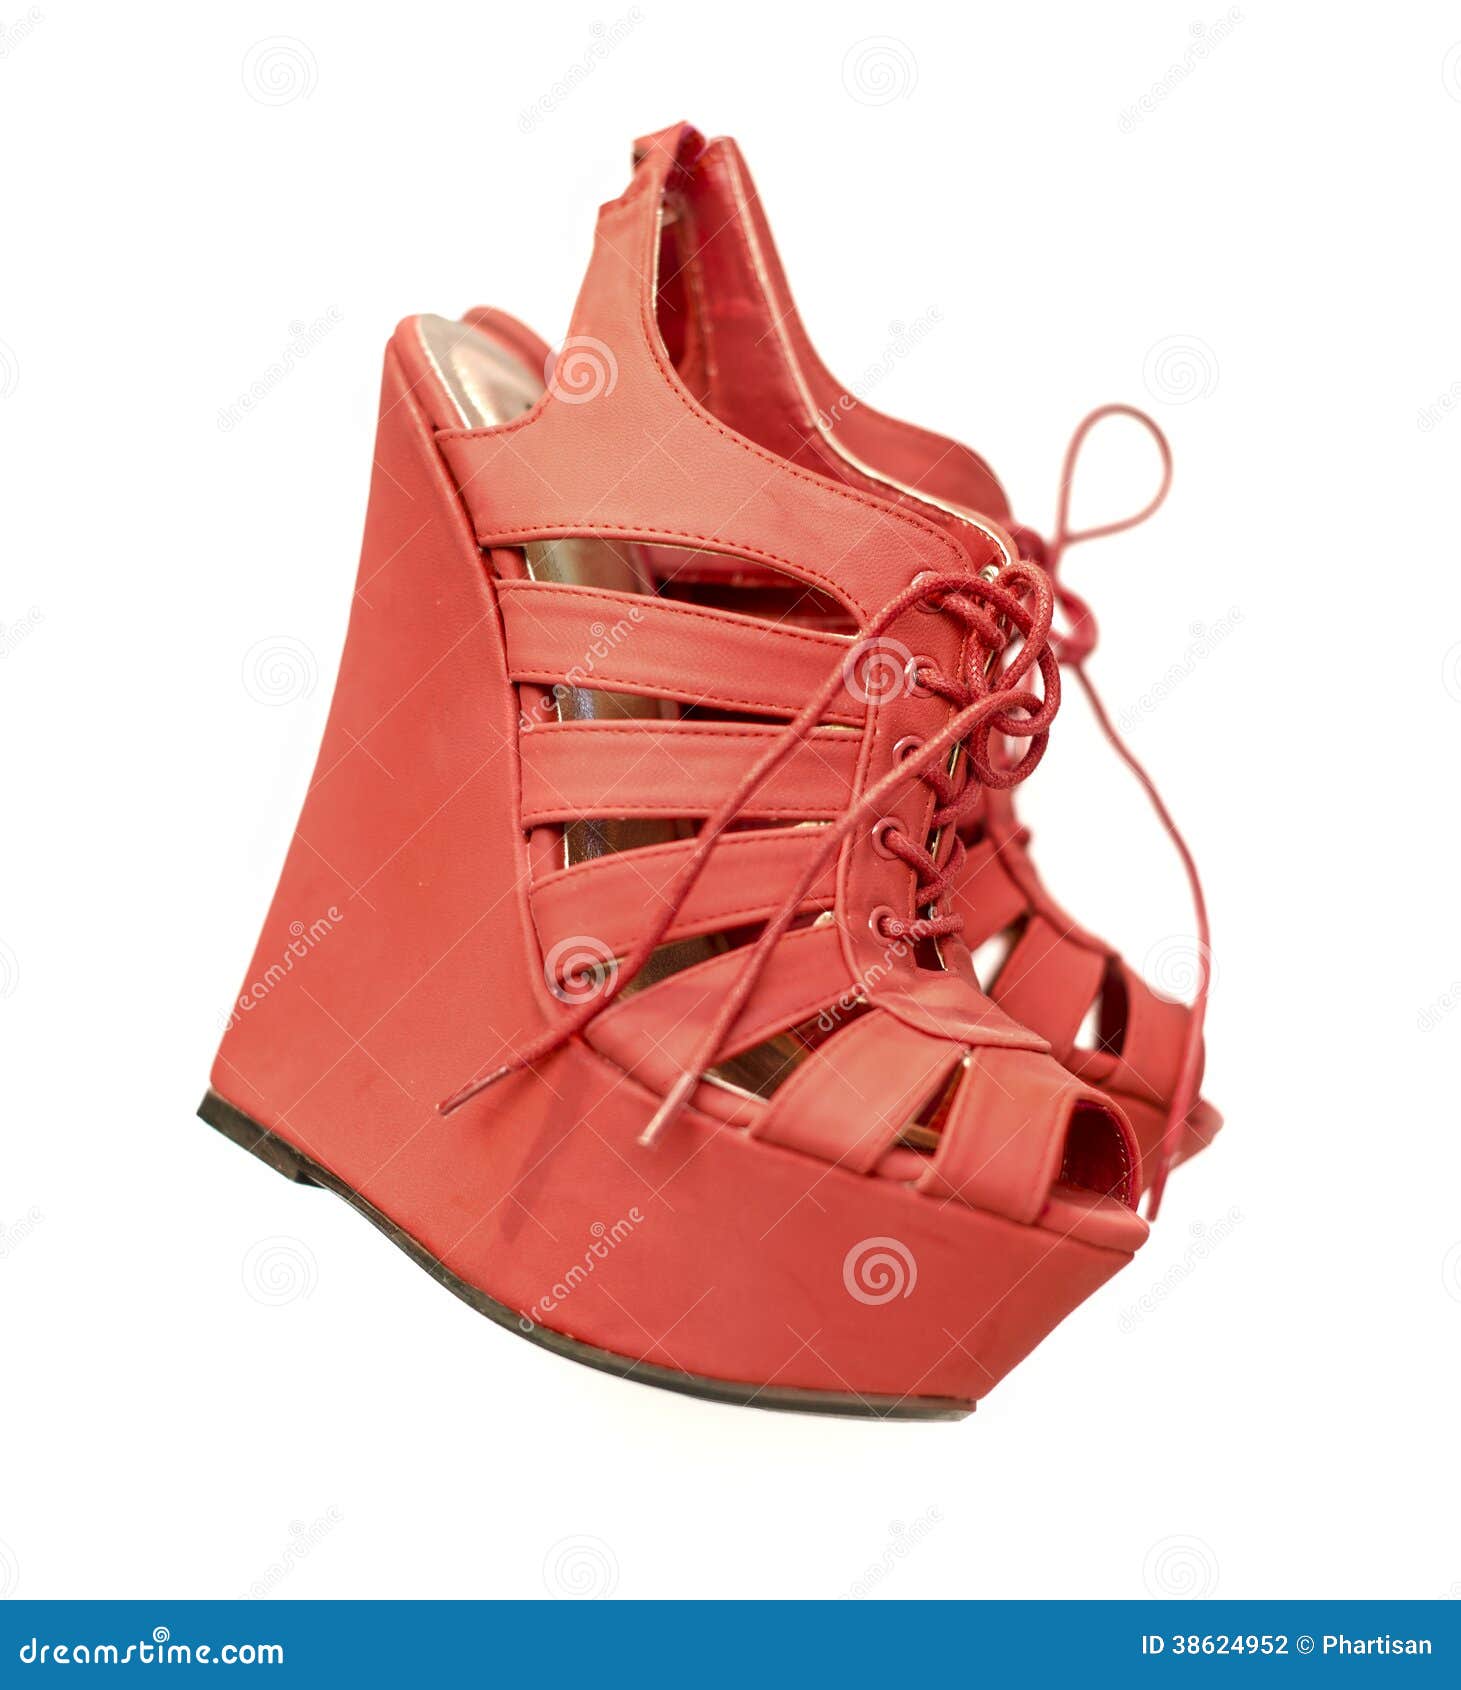 Ladies Red Fashion Wedge Heel Shoes Stock Photography - Image ...